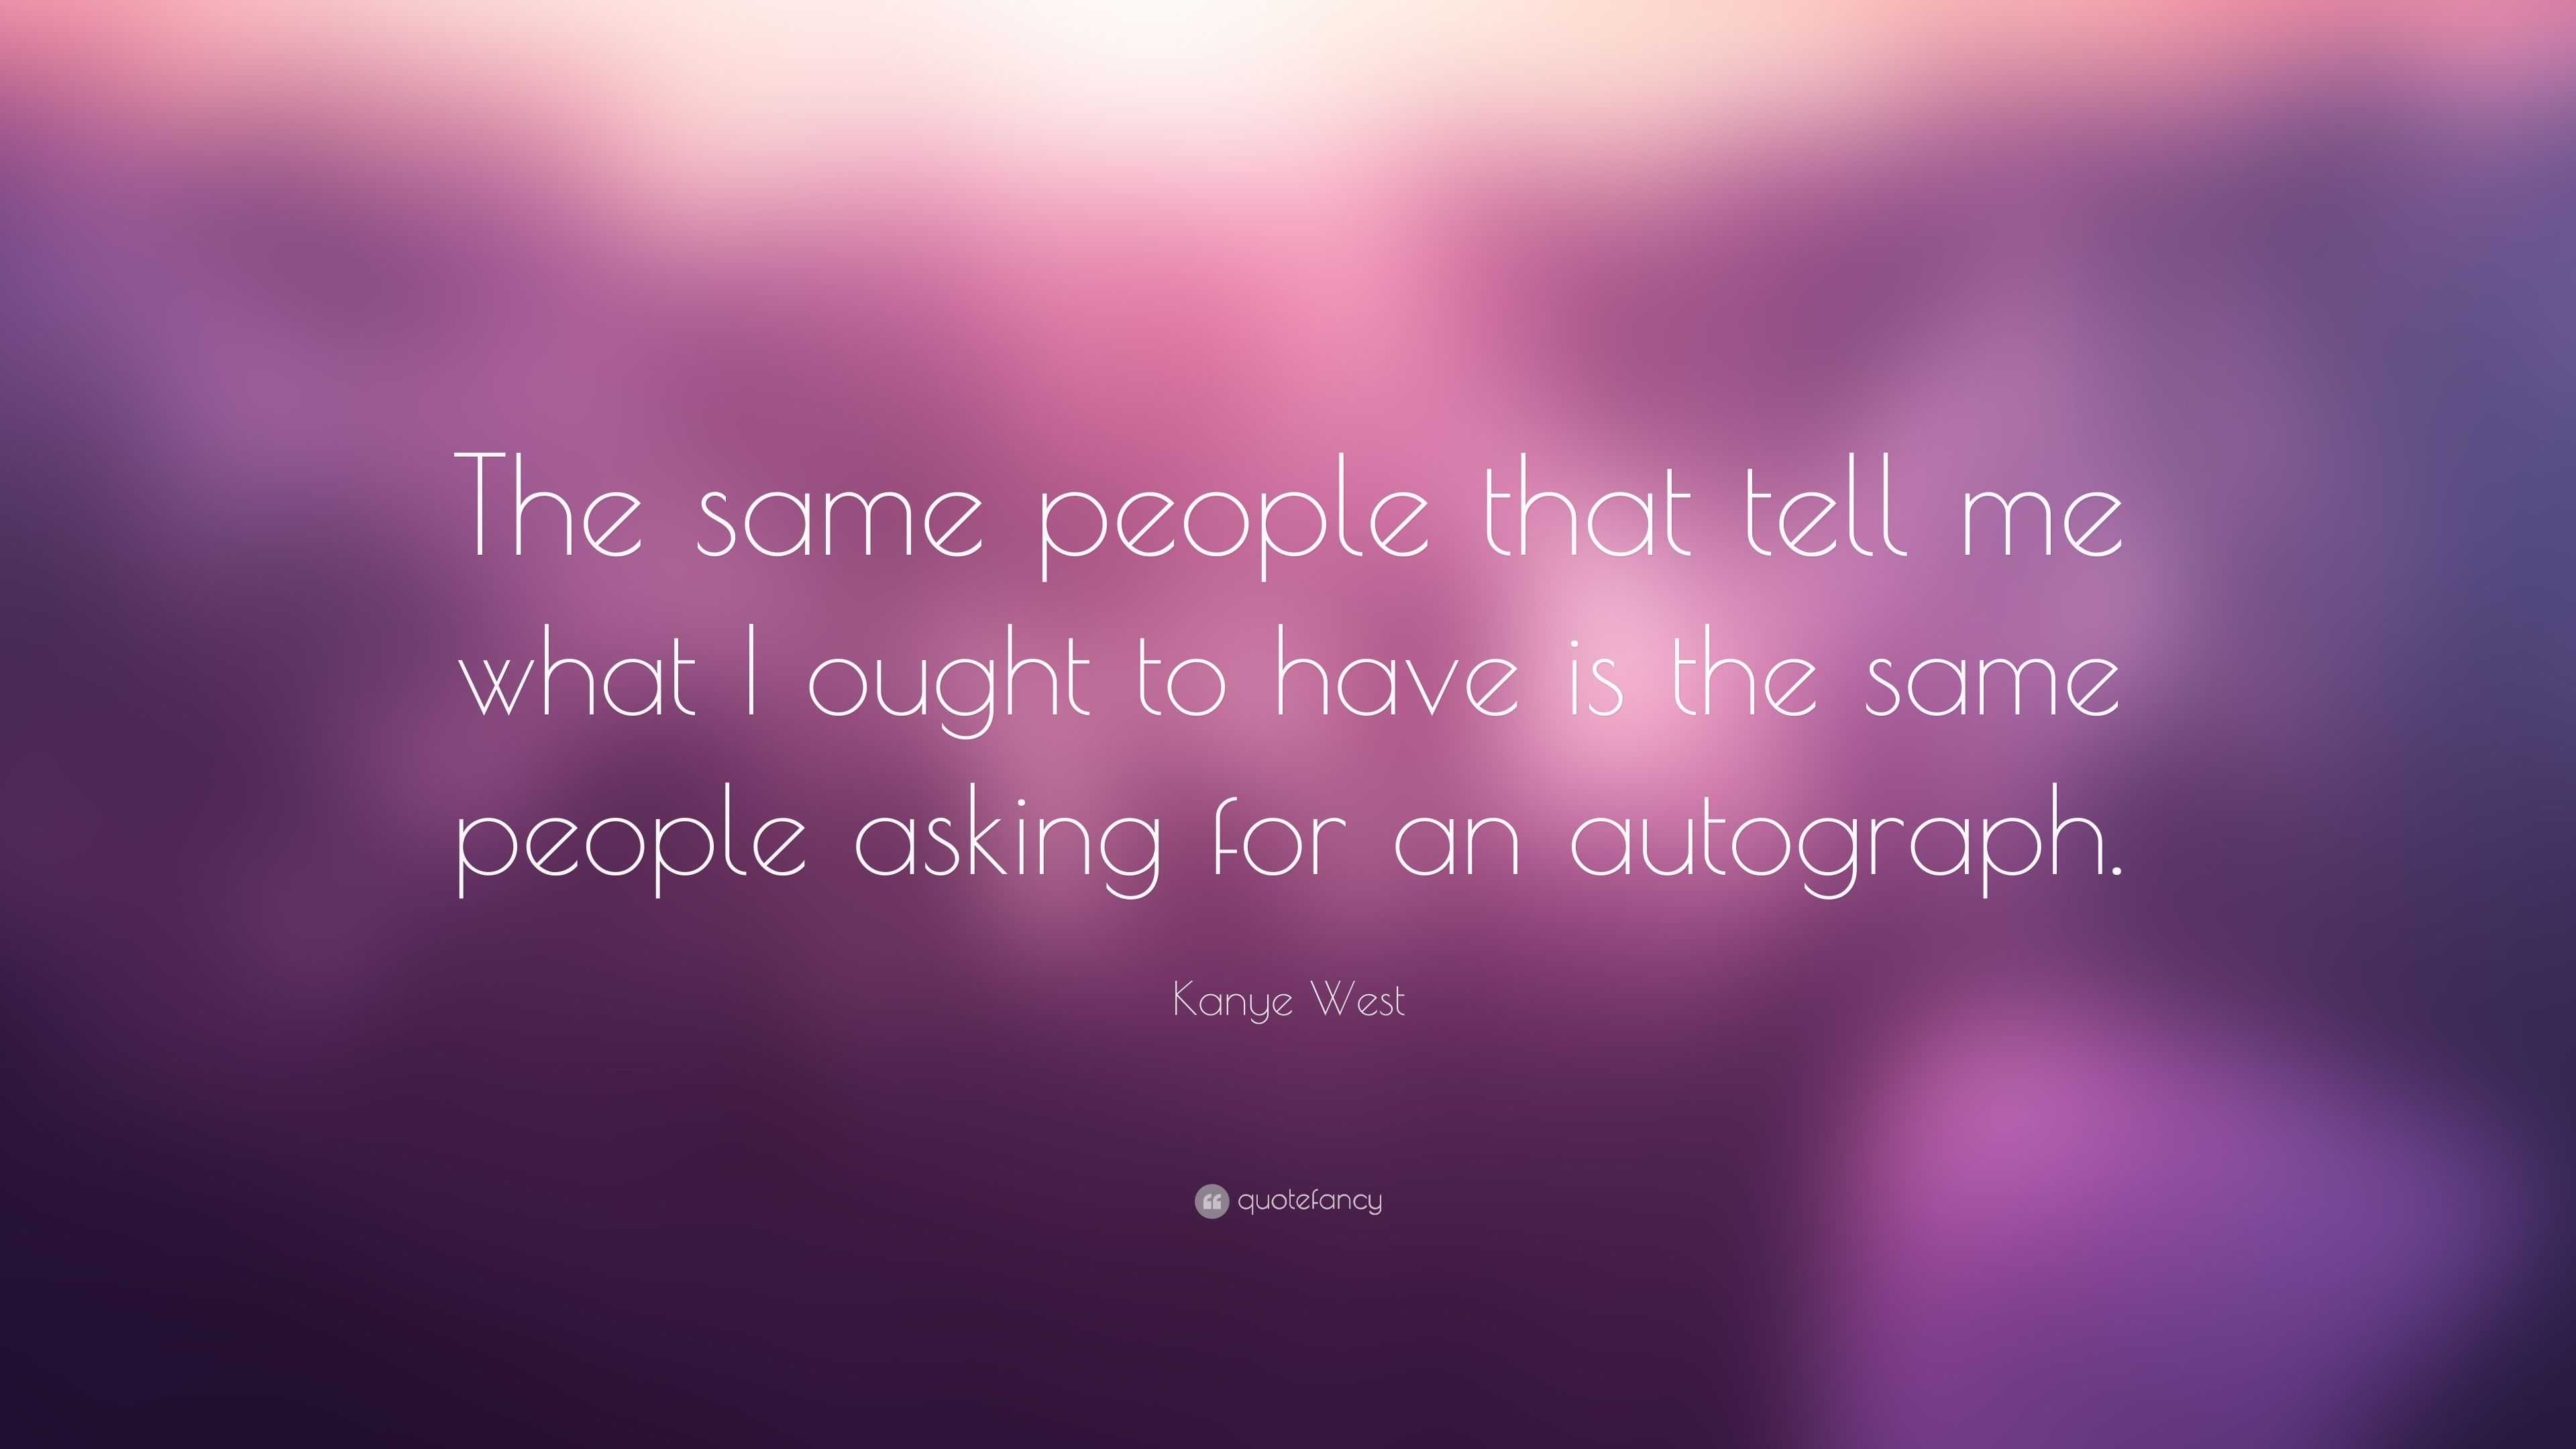 Kanye West Quote: “The same people that tell me what I ought to ...